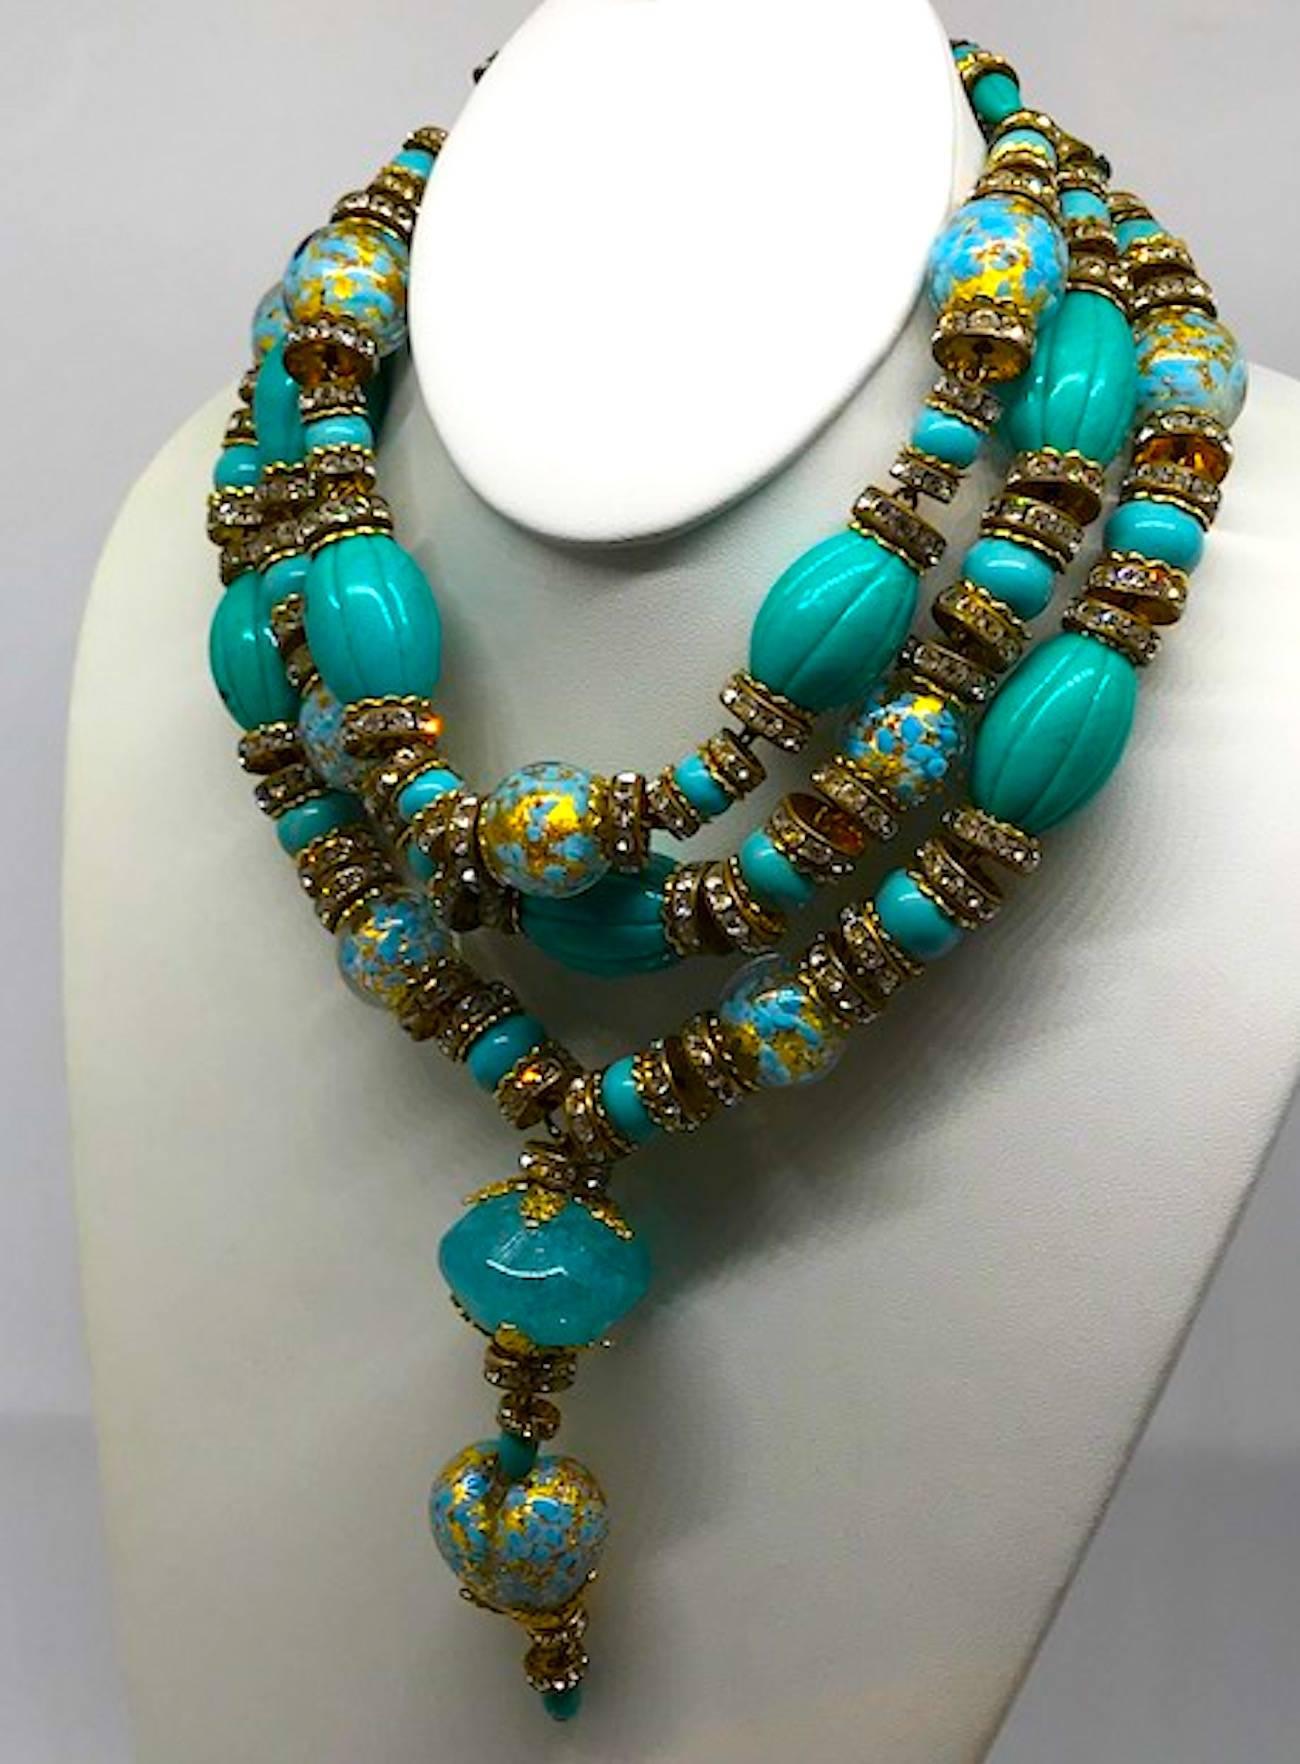 Venetian glass bead necklace from actress Elsa Martinelli's personal collection 2